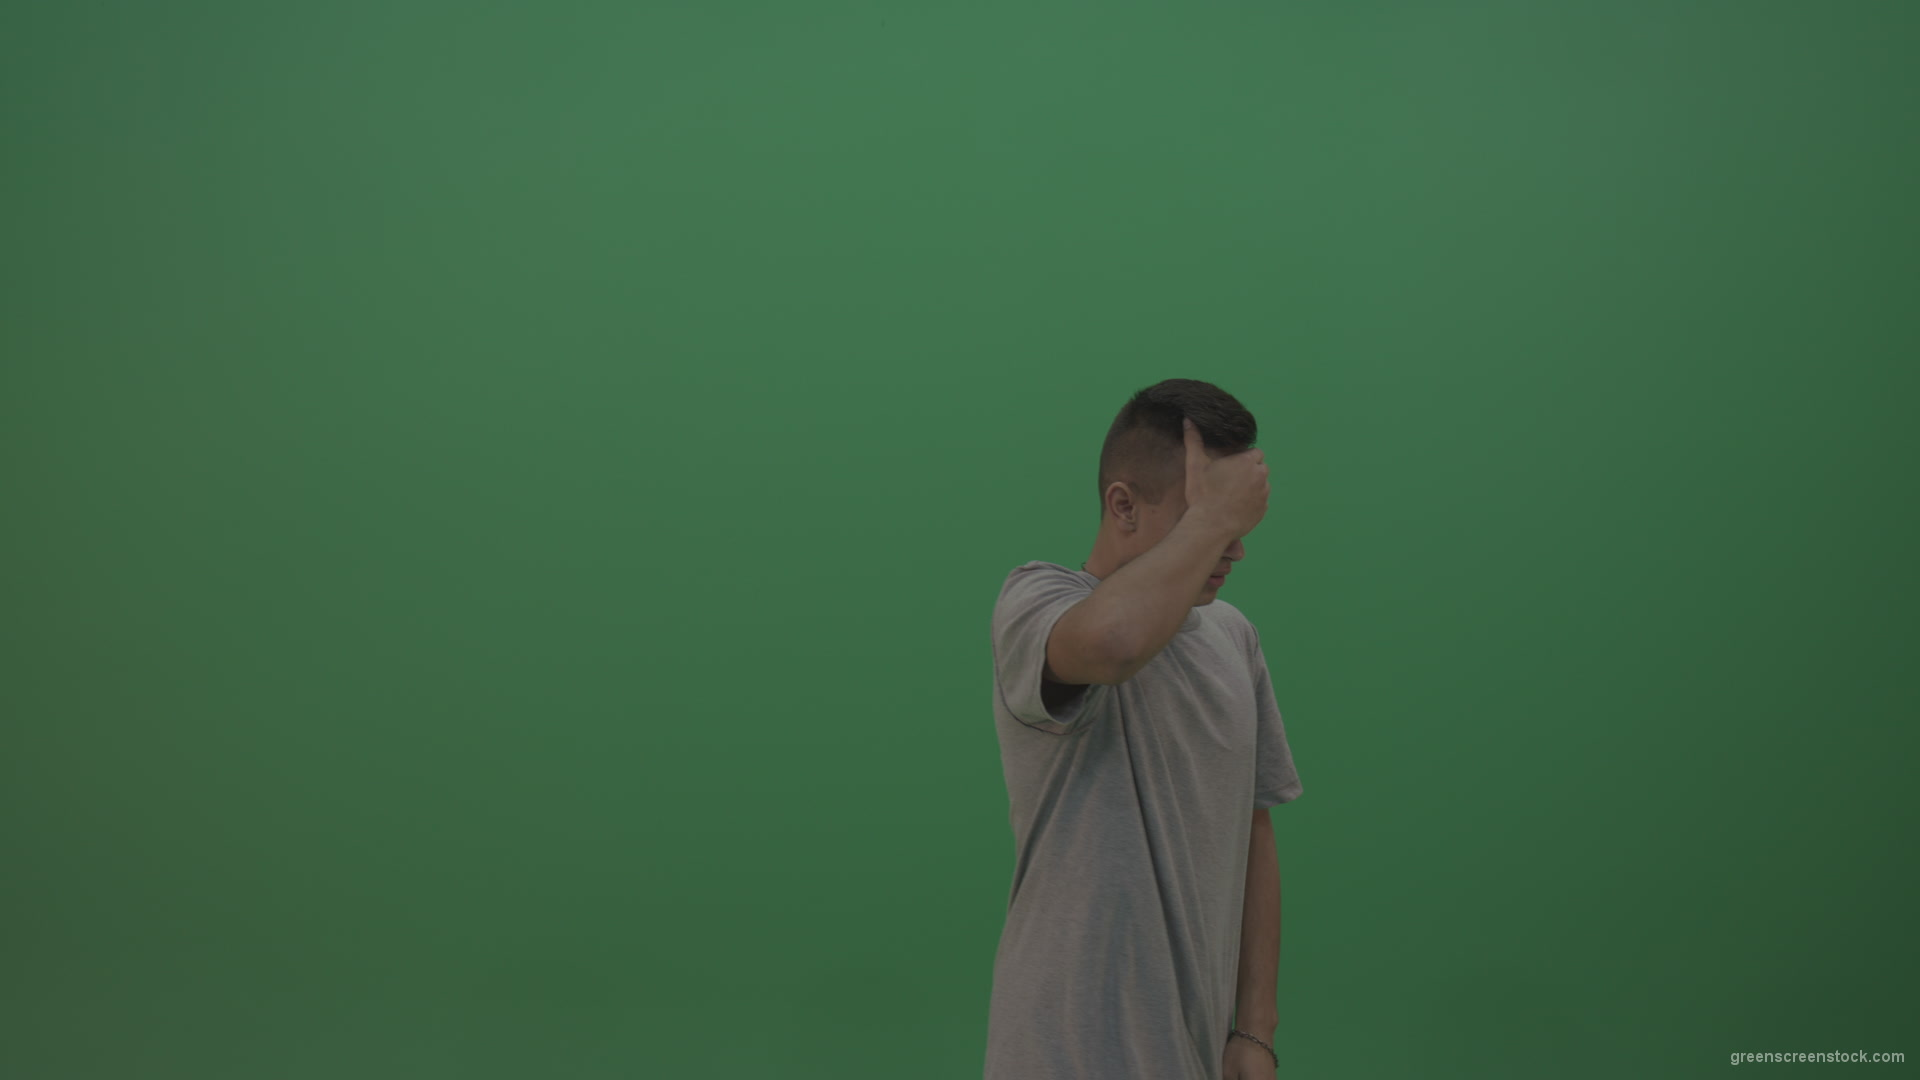 Boy-in-grey-wear-expresses-disappointment-over-green-screen-background_006 Green Screen Stock